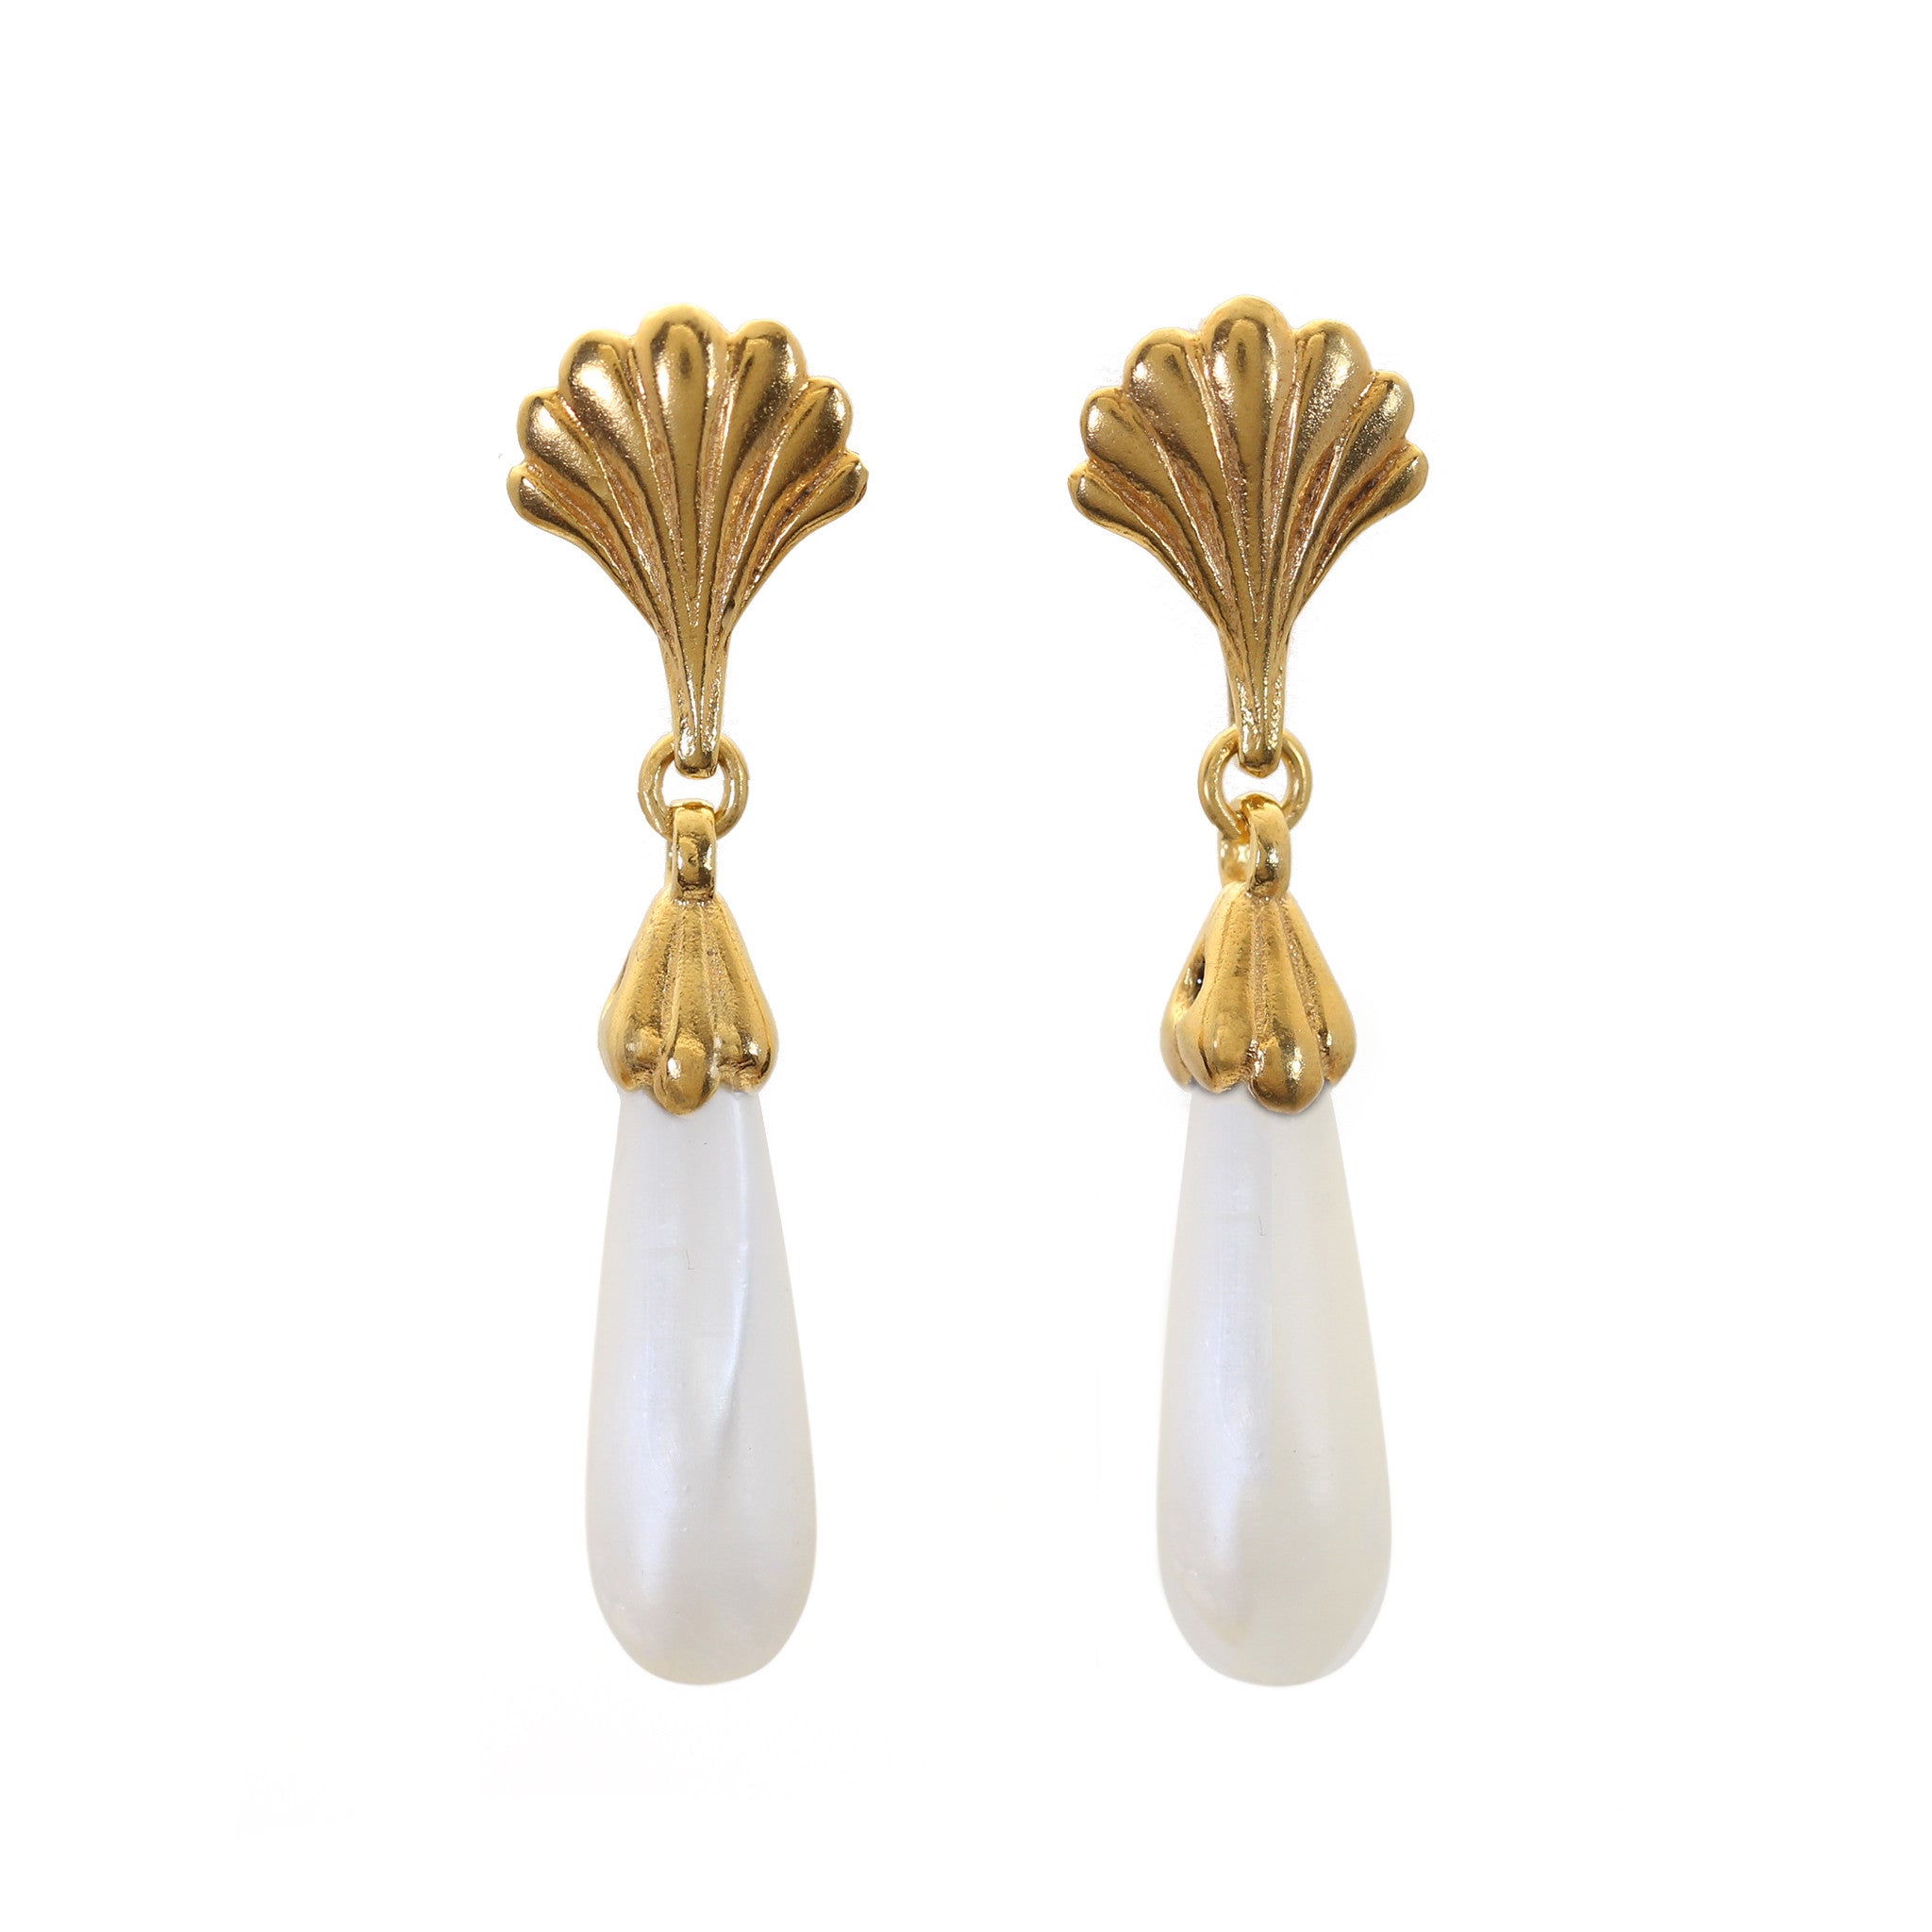 Yellow gold and mother of pearl drop earrings with shell